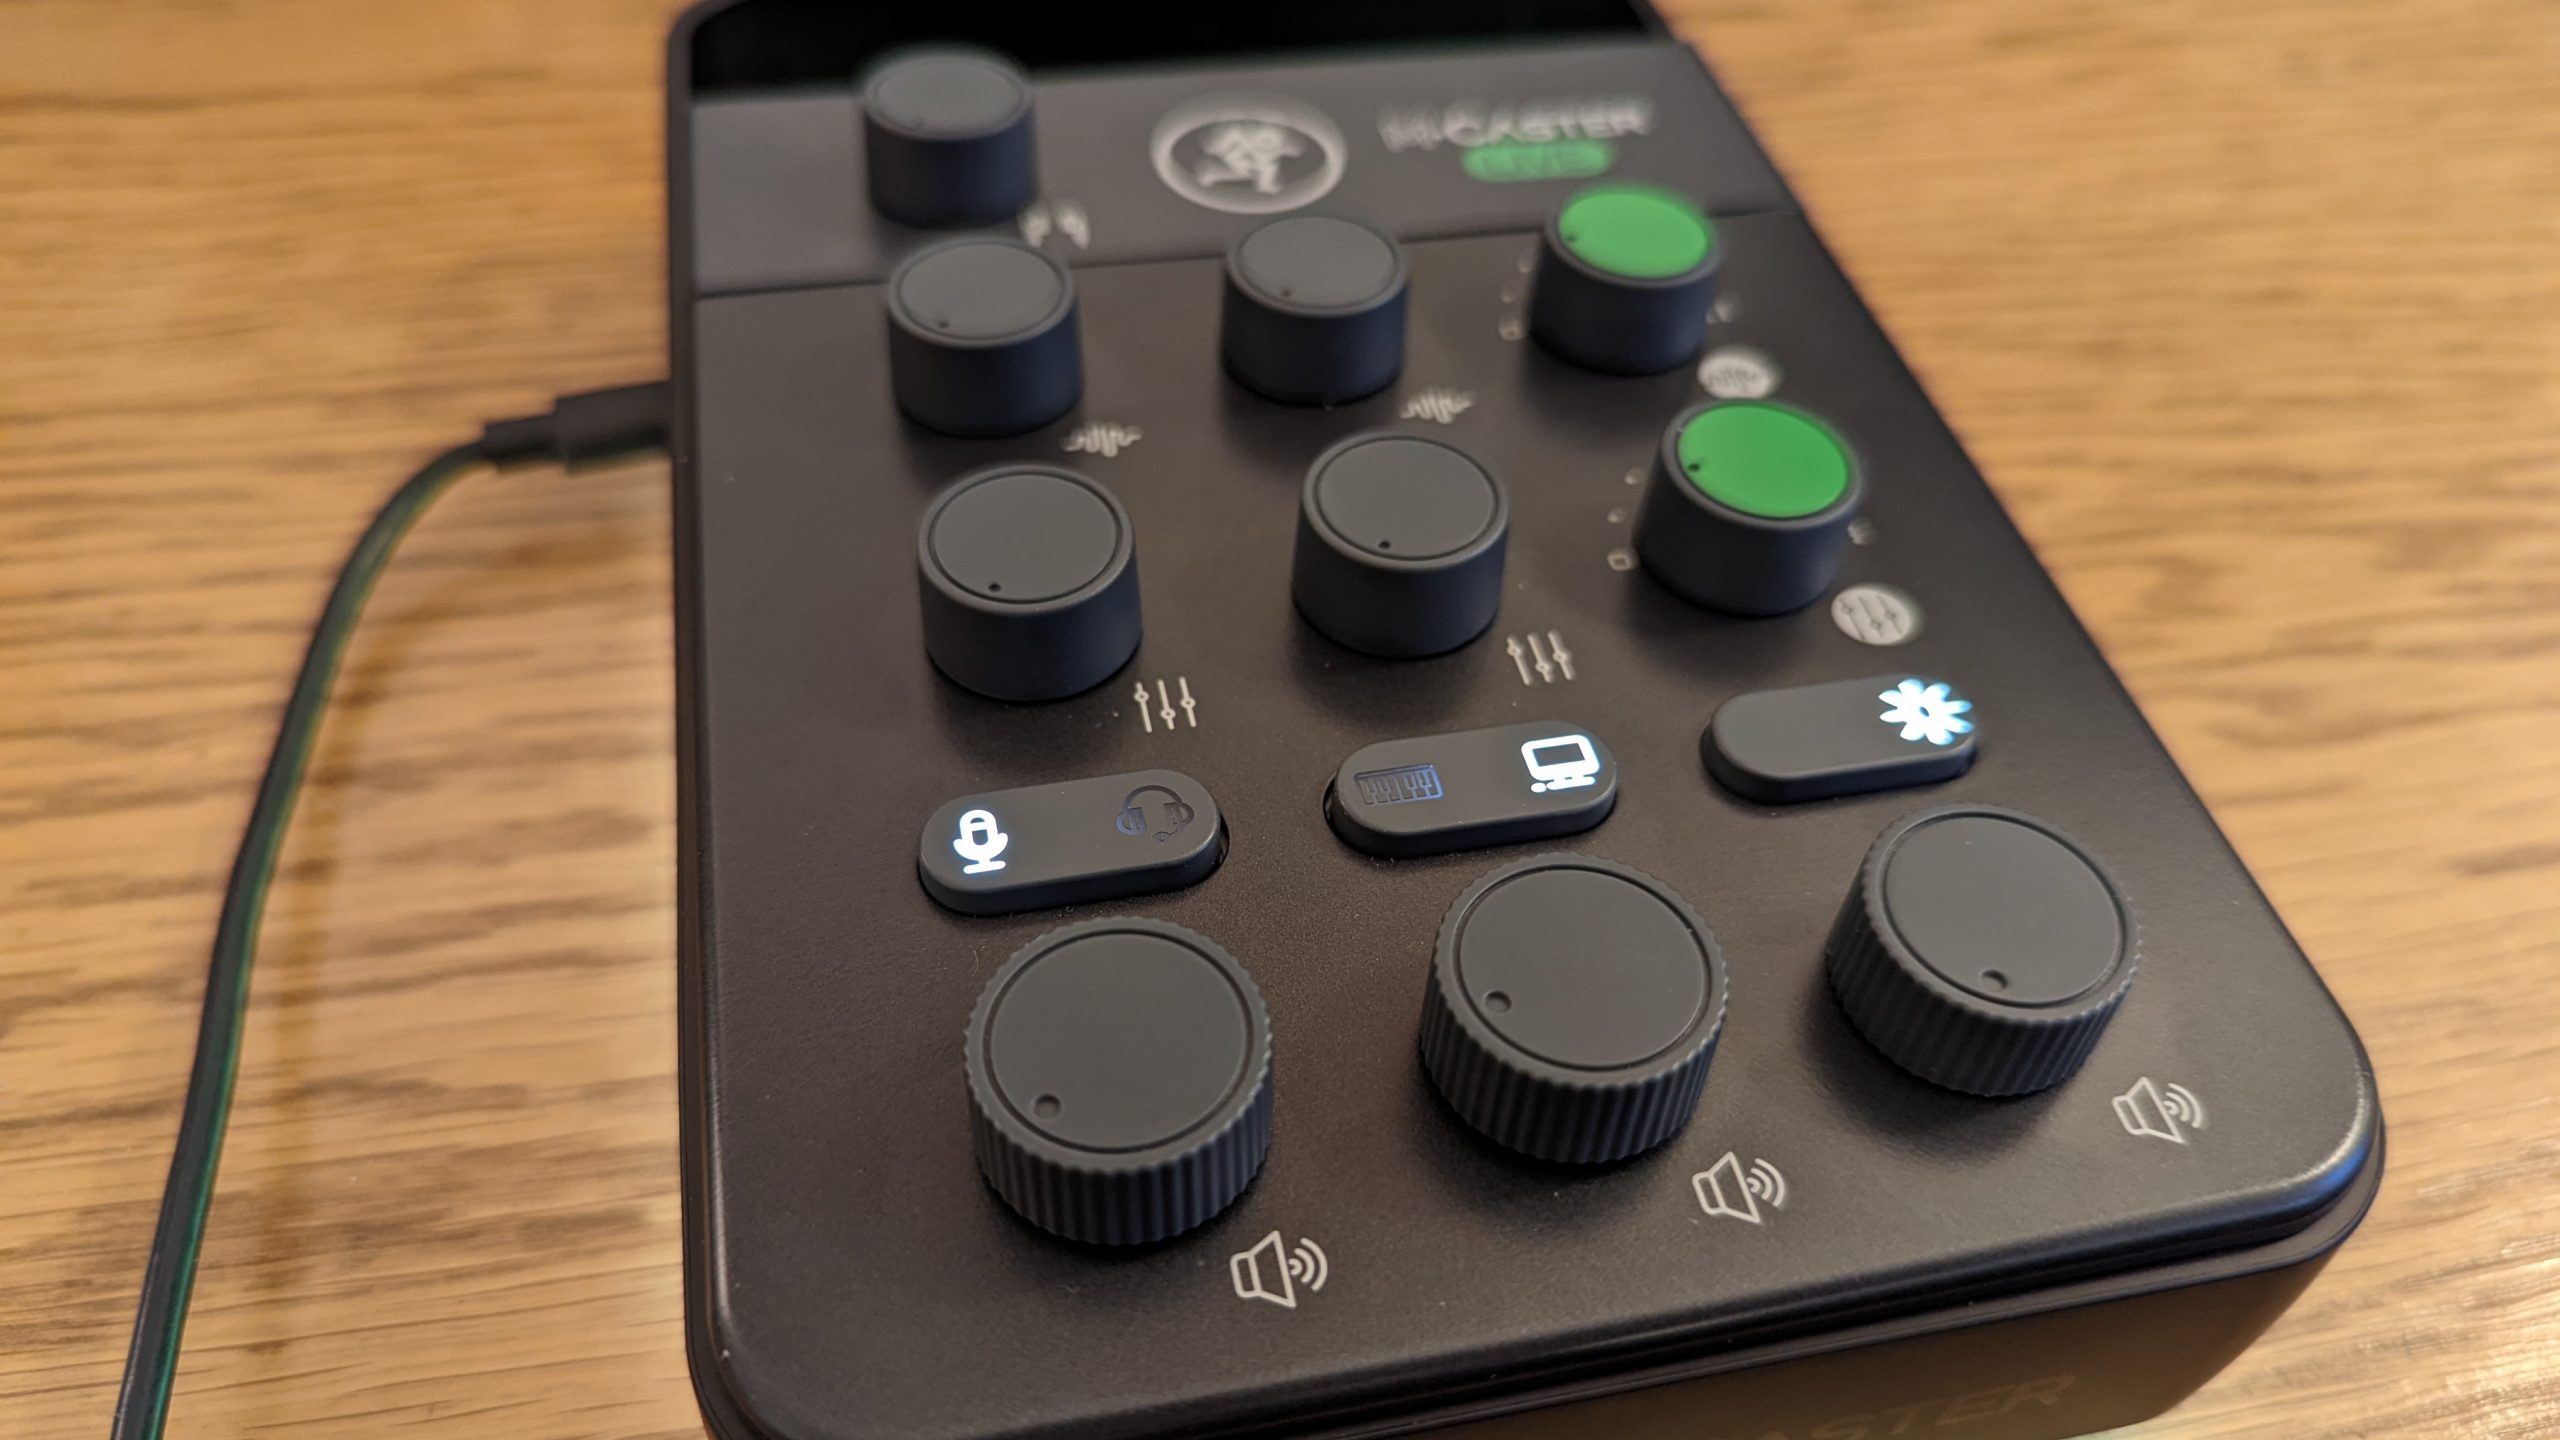 Mackie M-Caster Live Review: A Decent Tool For On-the-Go Live Mixing